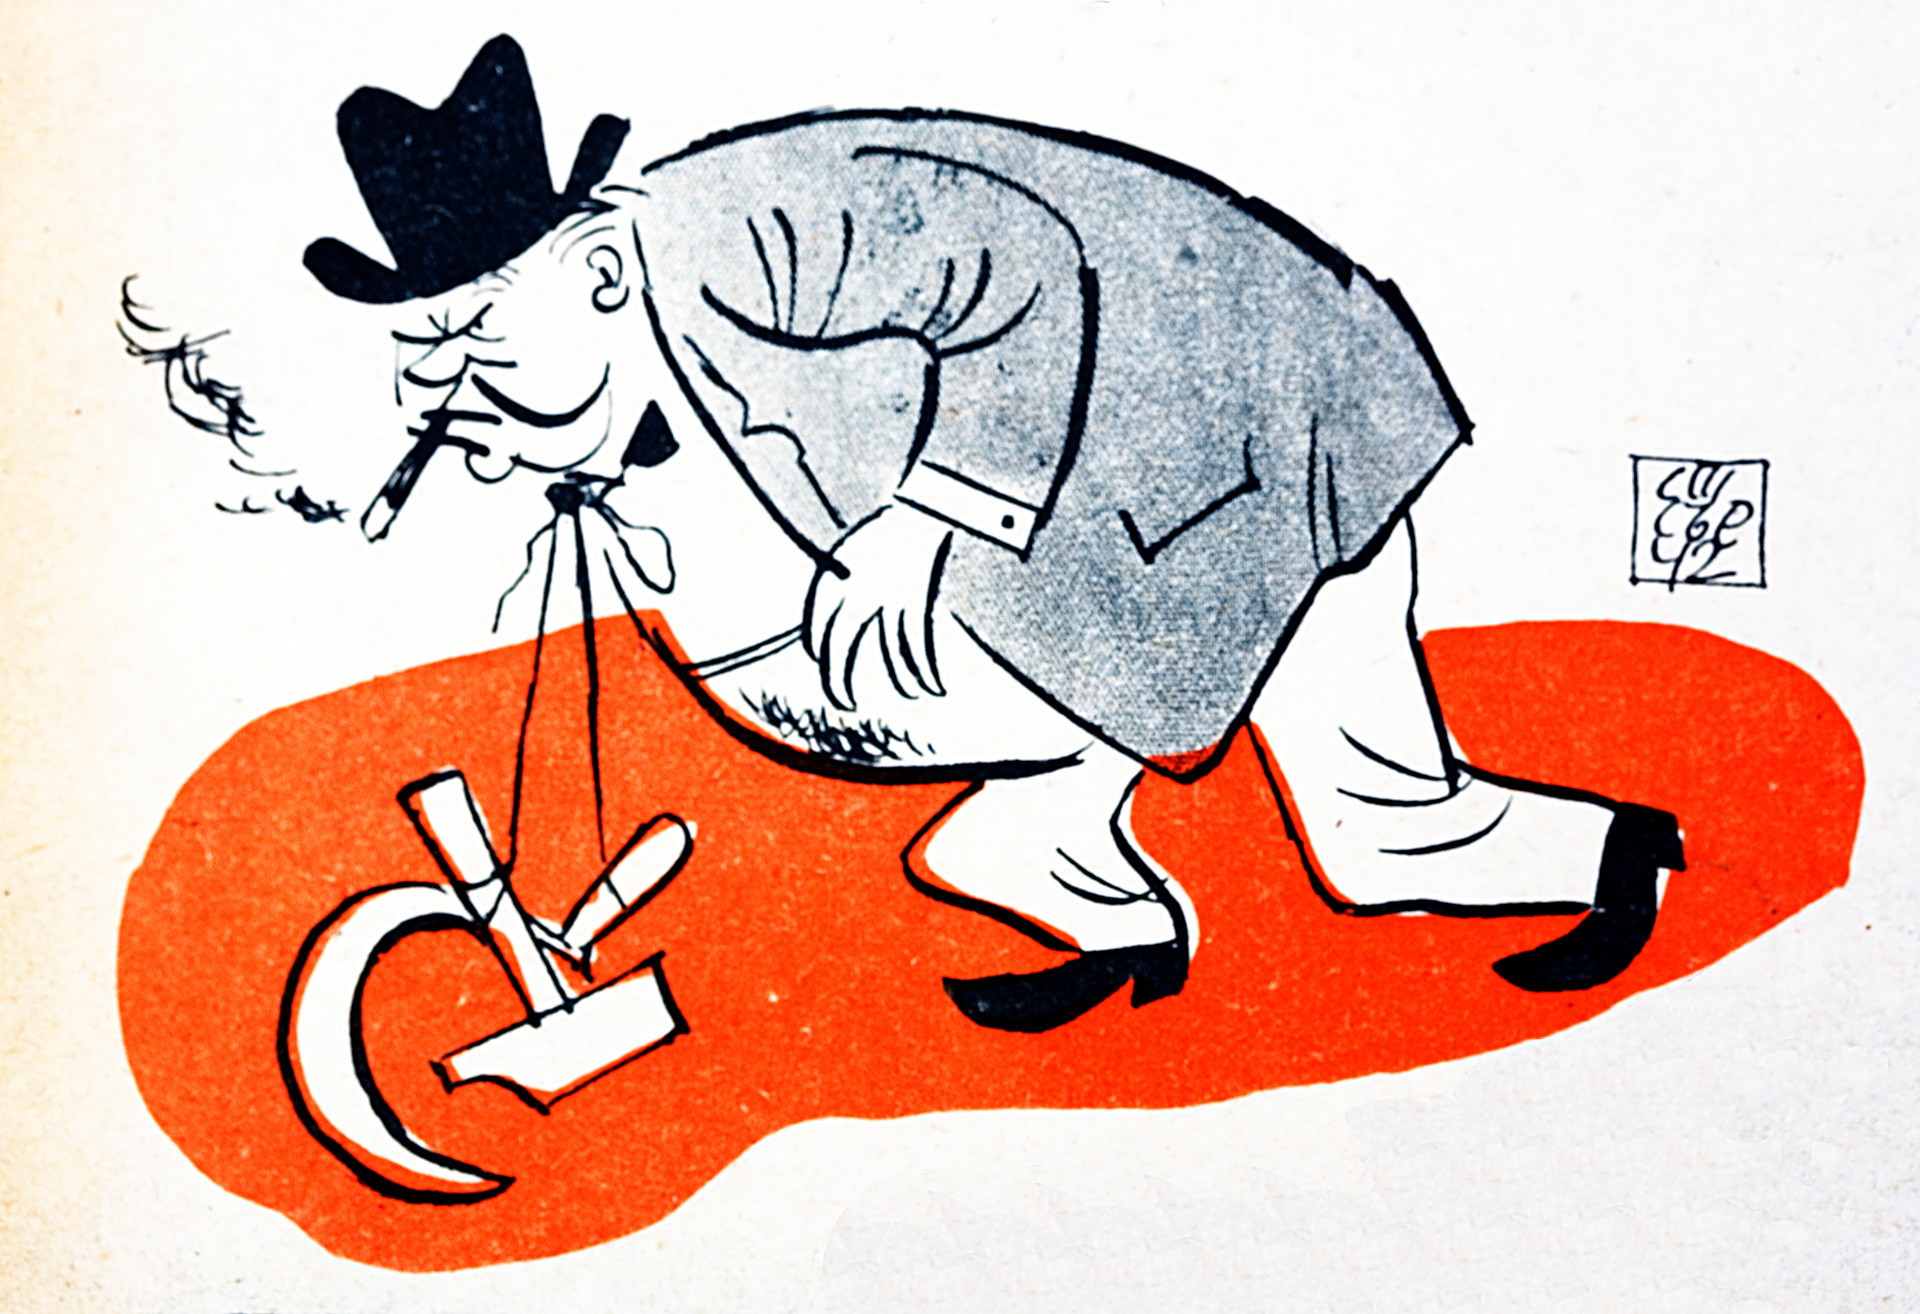 Pro-Nazi caricature showing Winston Churchill weighed down by the Communist hammer and sickle, symbolizing his alliance with Russia.